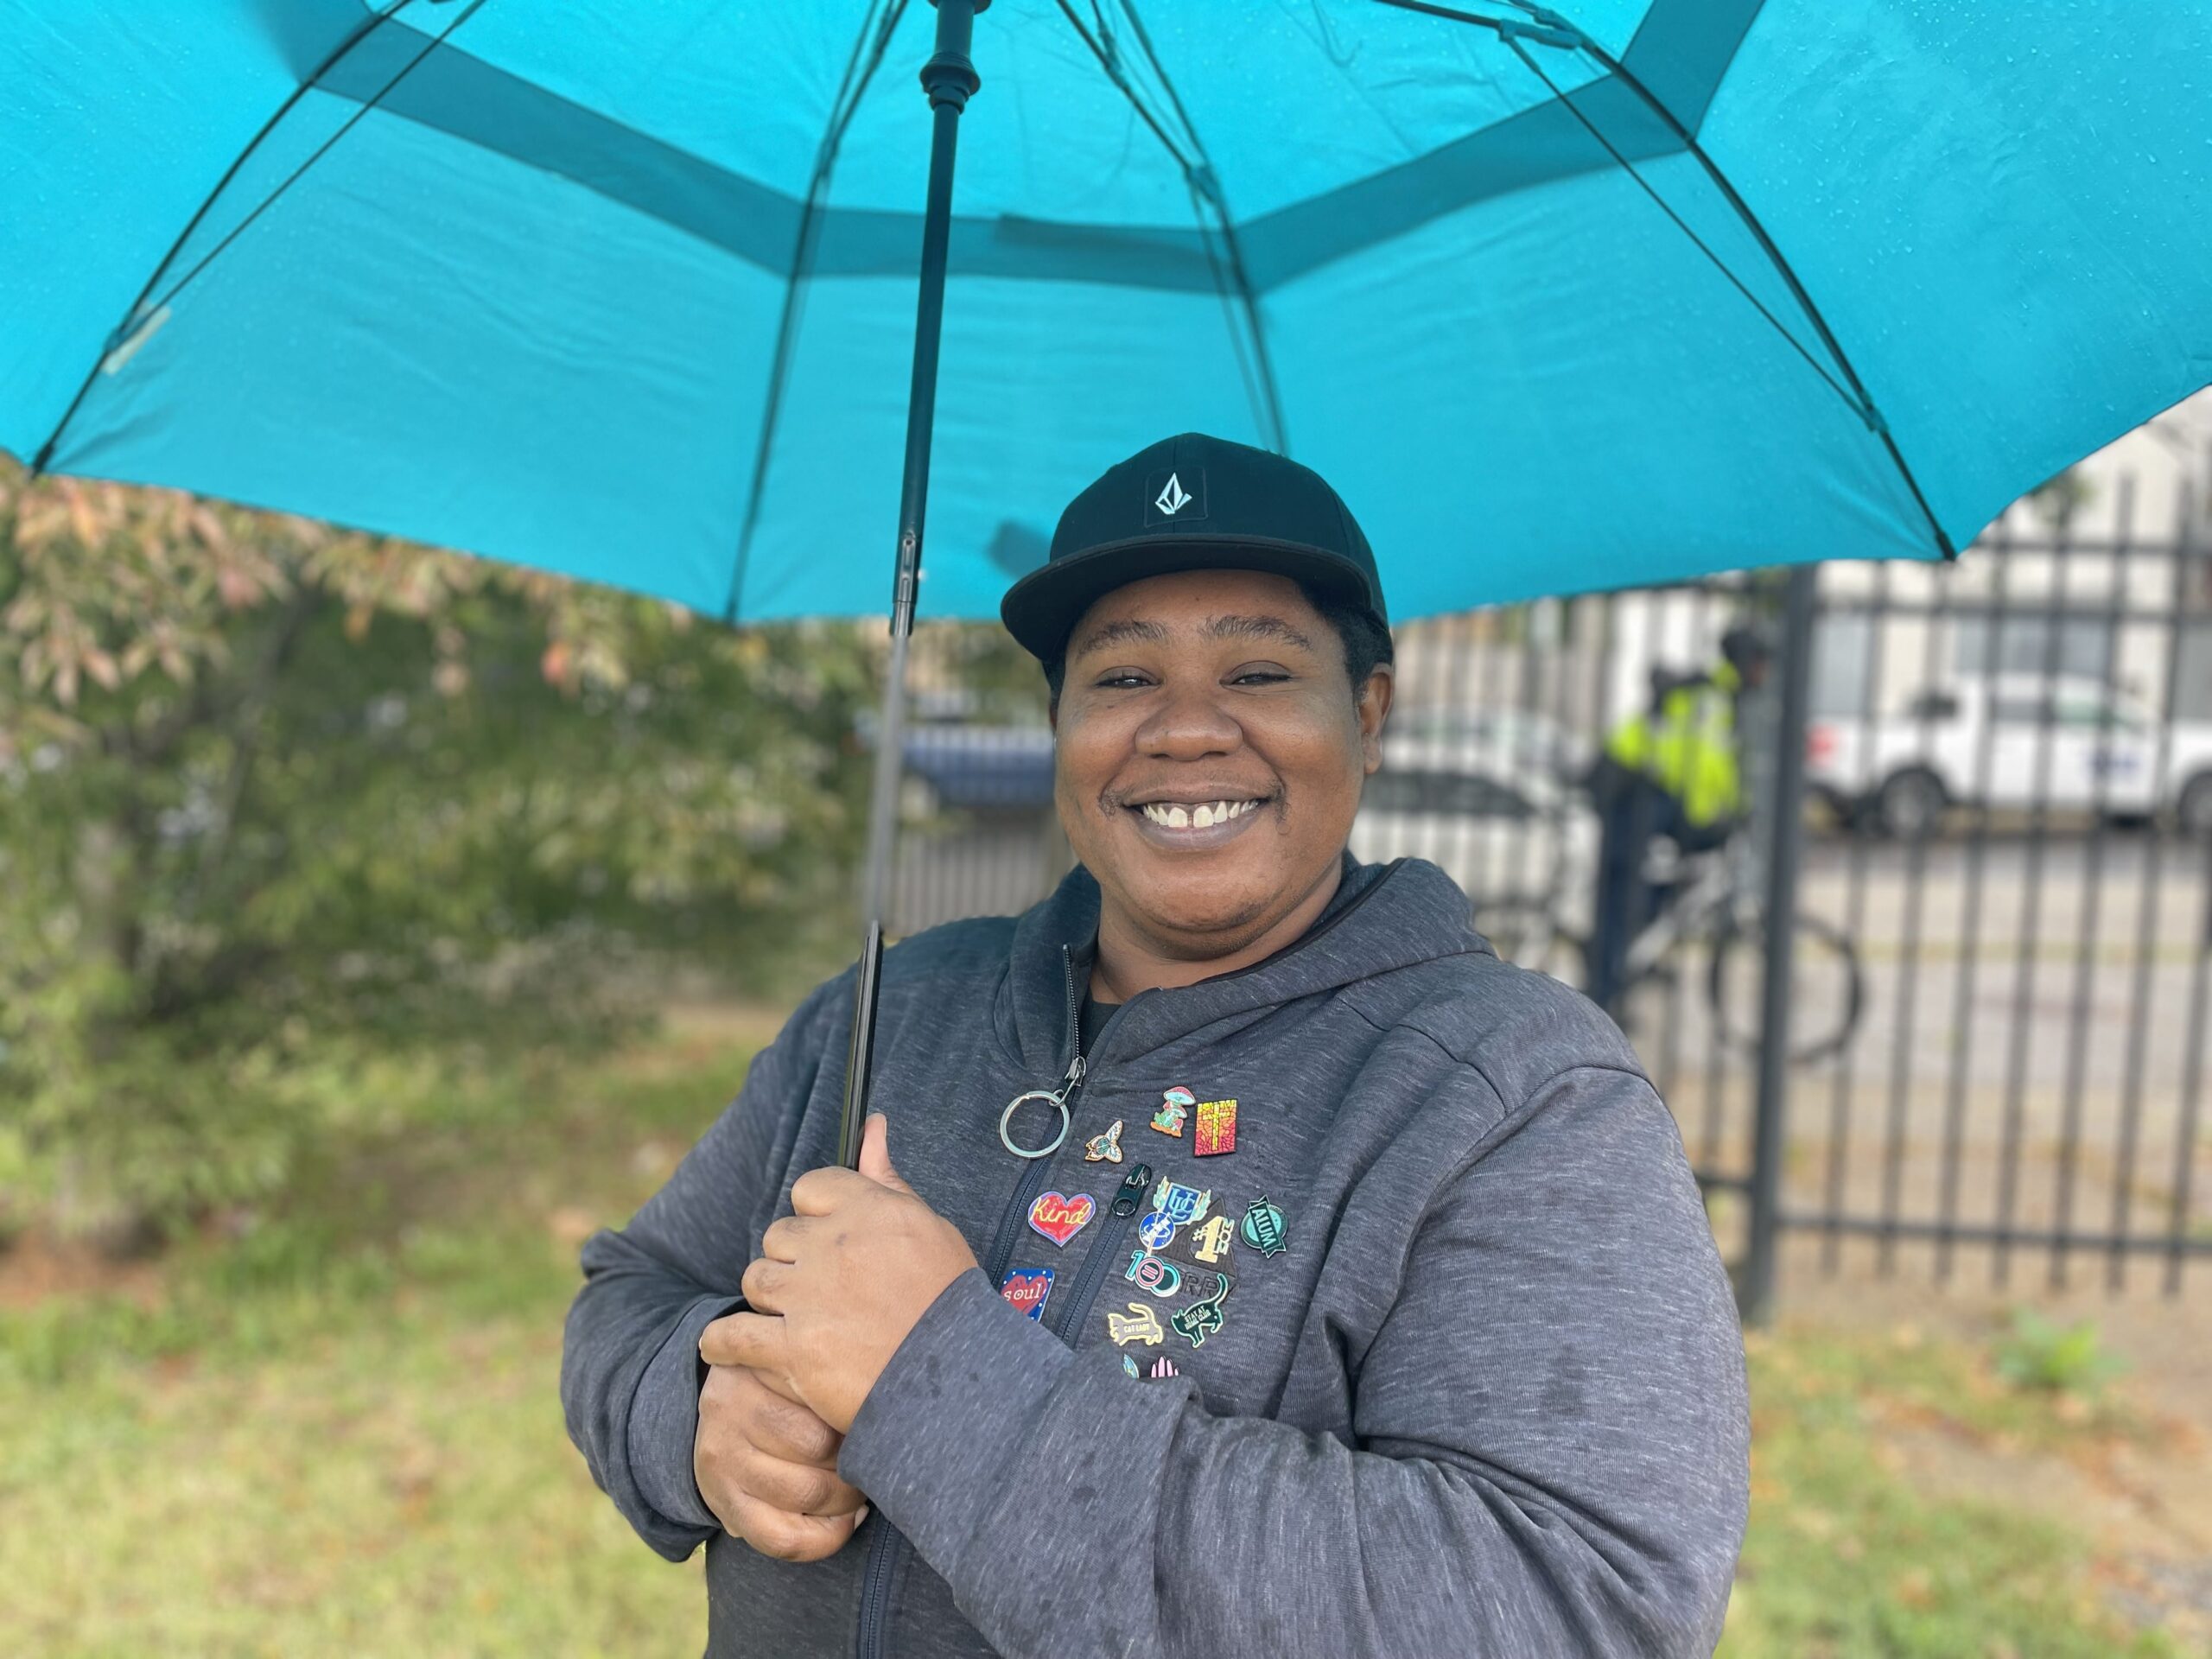 Shonta’ High in Bruce Monroe Park Oct. 7 adorned in her expressive mural of pins. “I love pins. And this lady actually gave me these two. Cause she was like, you're such a kind soul,” she said. “I put it right in the way she said it. ‘Kind soul.’ I love that.” 